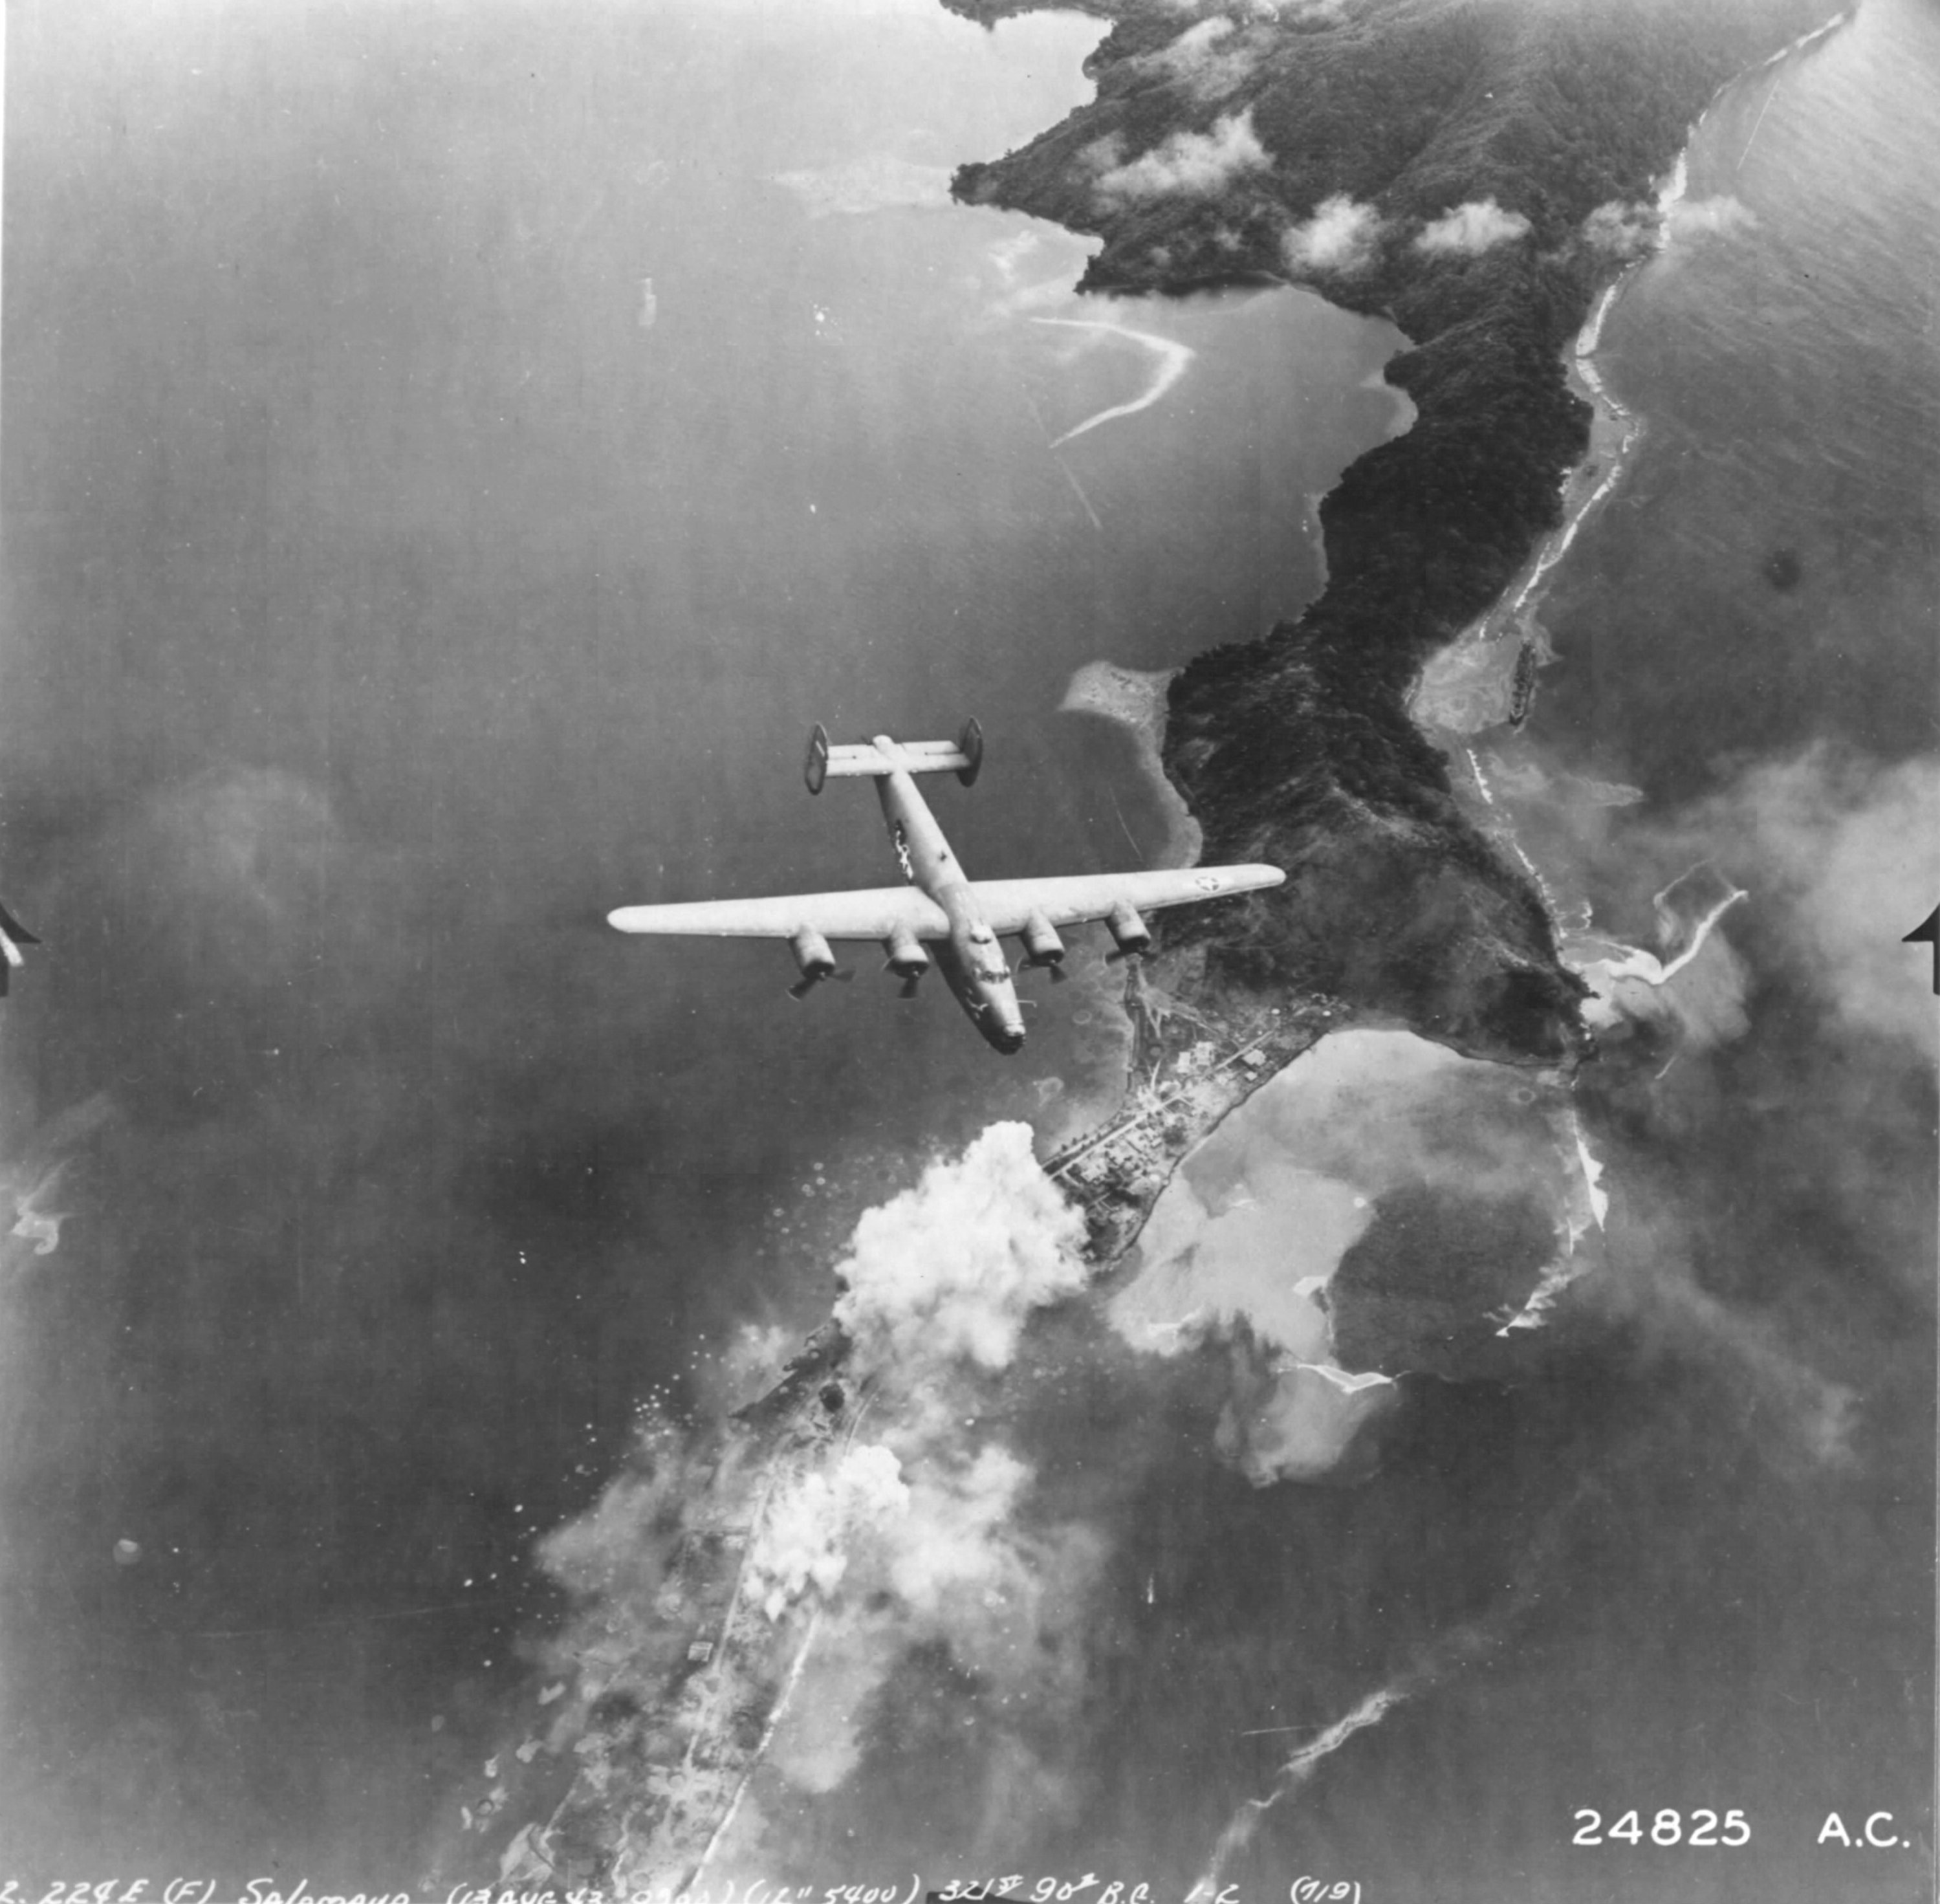 B-24 Liberator of the 43rd Bomb Group during a bombing run over the major Japanese base at Salamaua, Australian New Guinea, Aug 13, 1943.